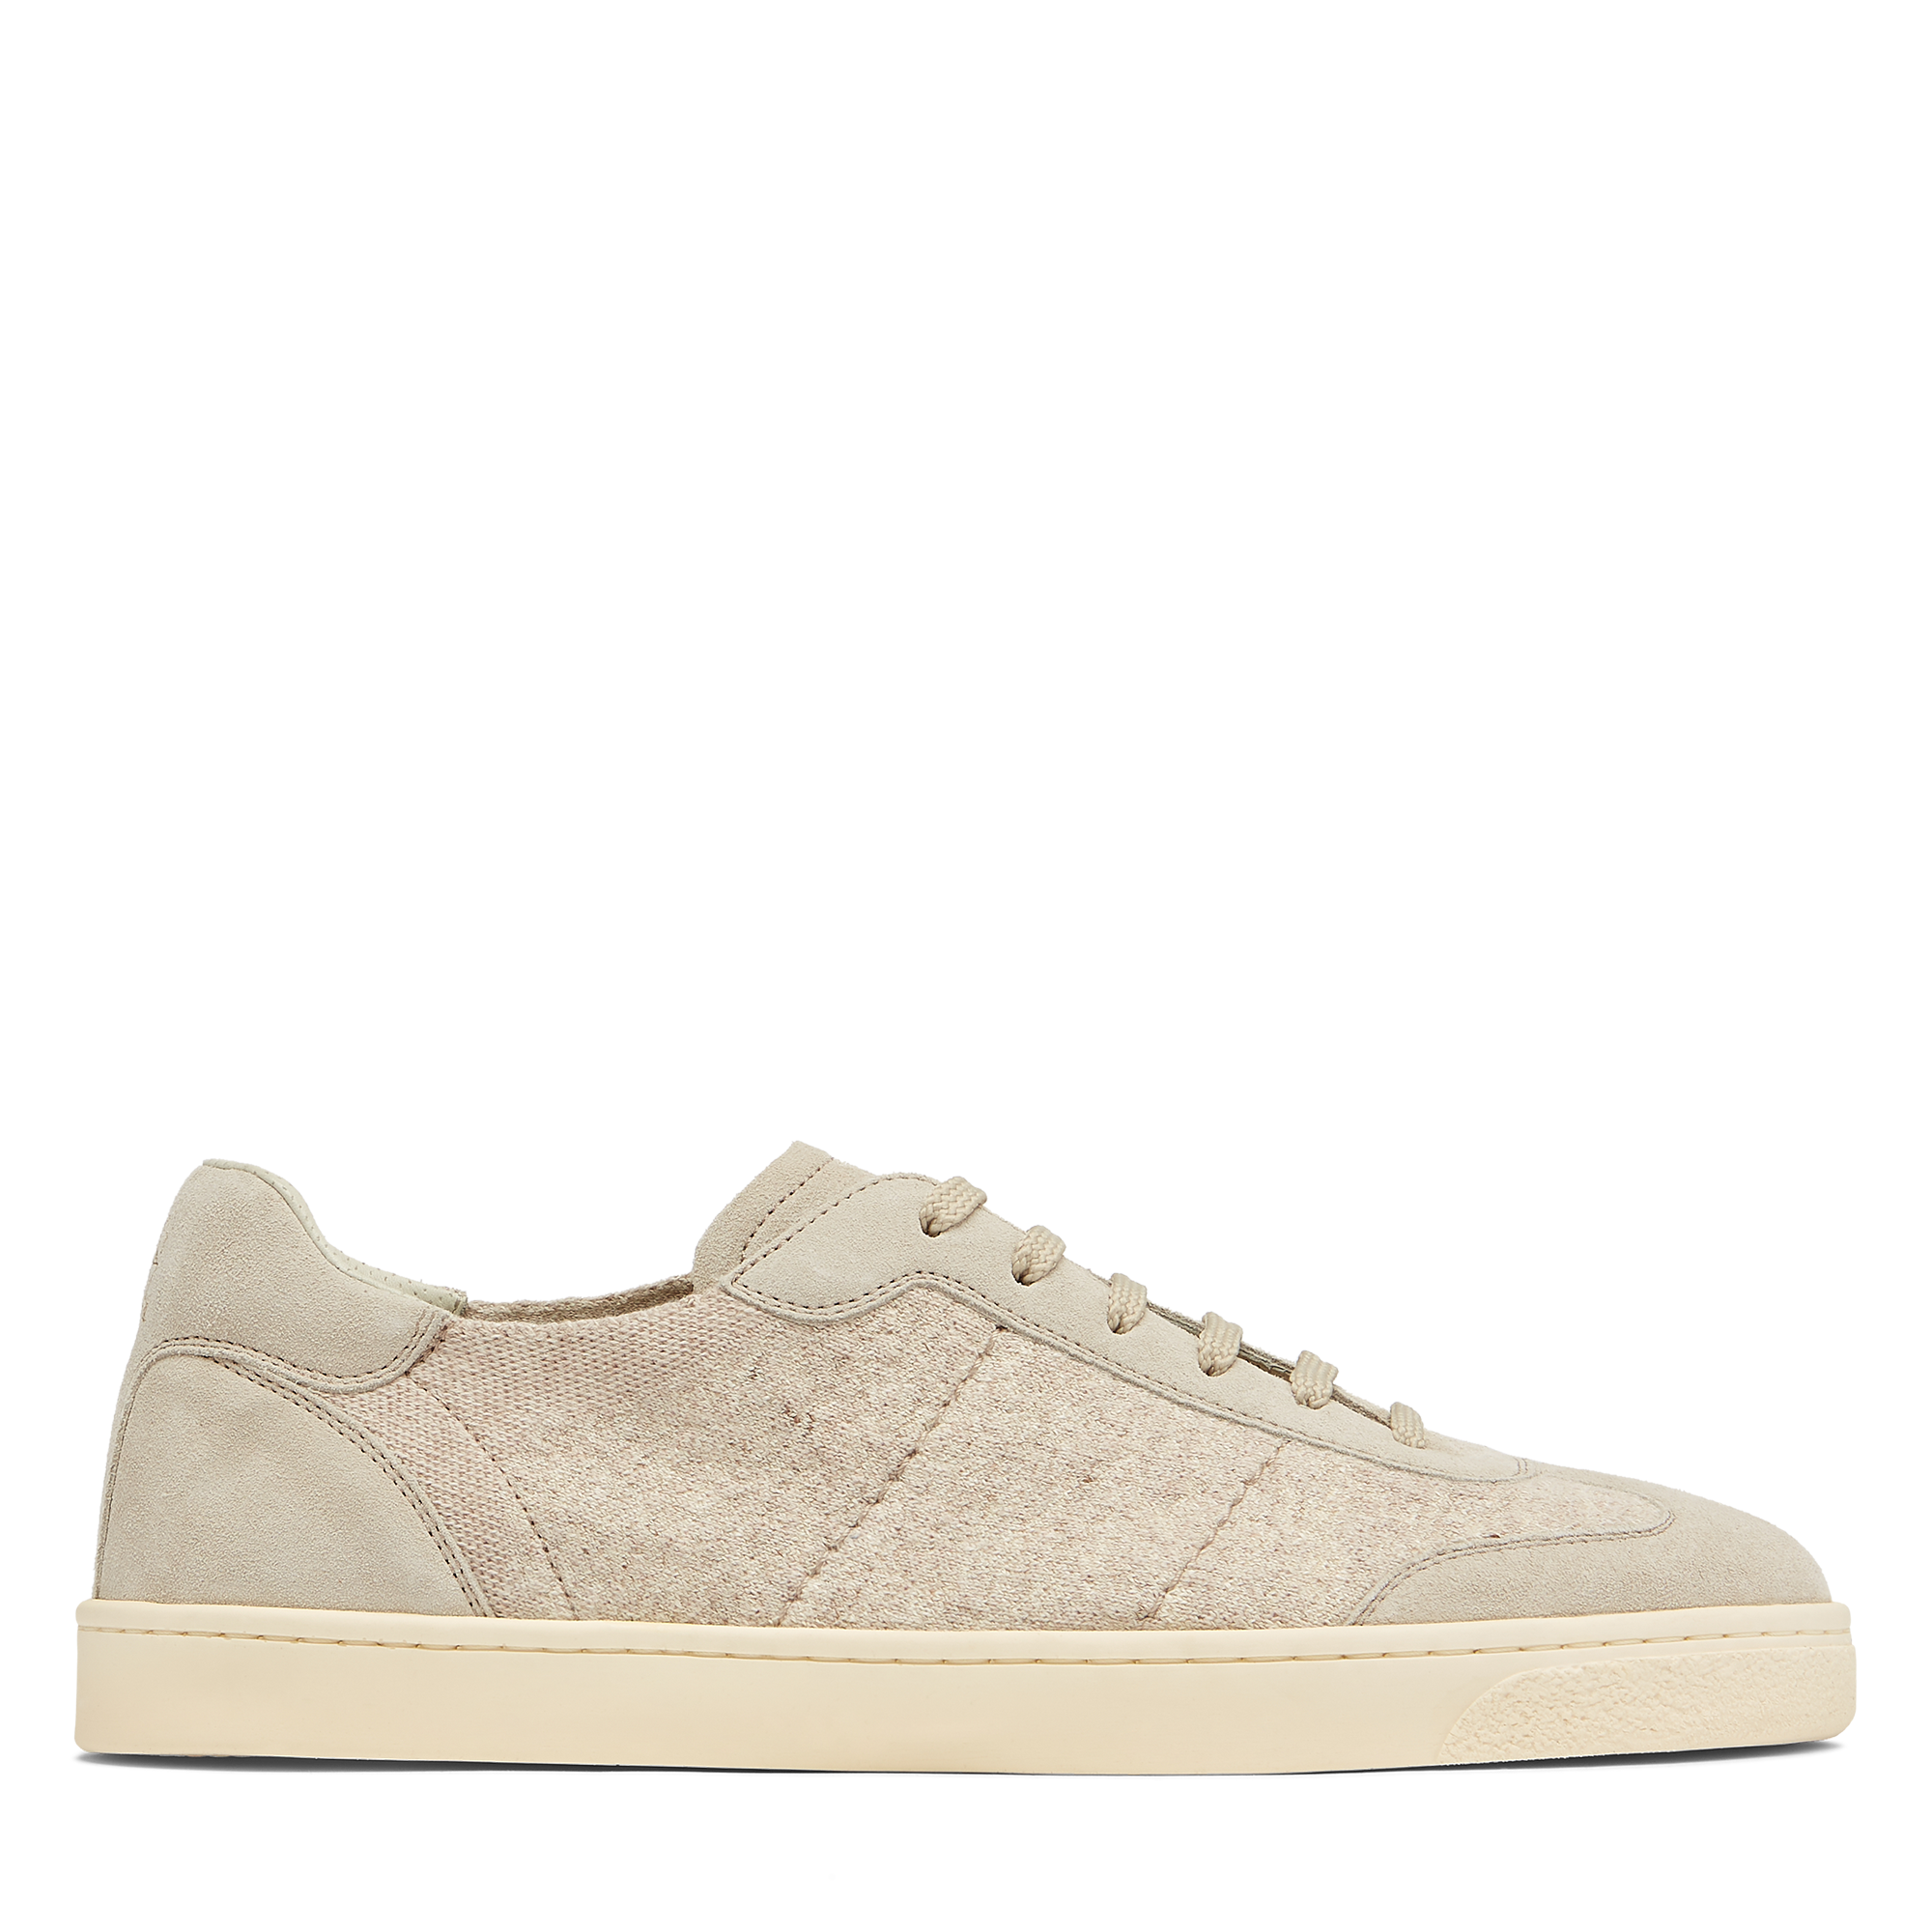 Brunello Cucinelli Linen and cotton knit sneakers